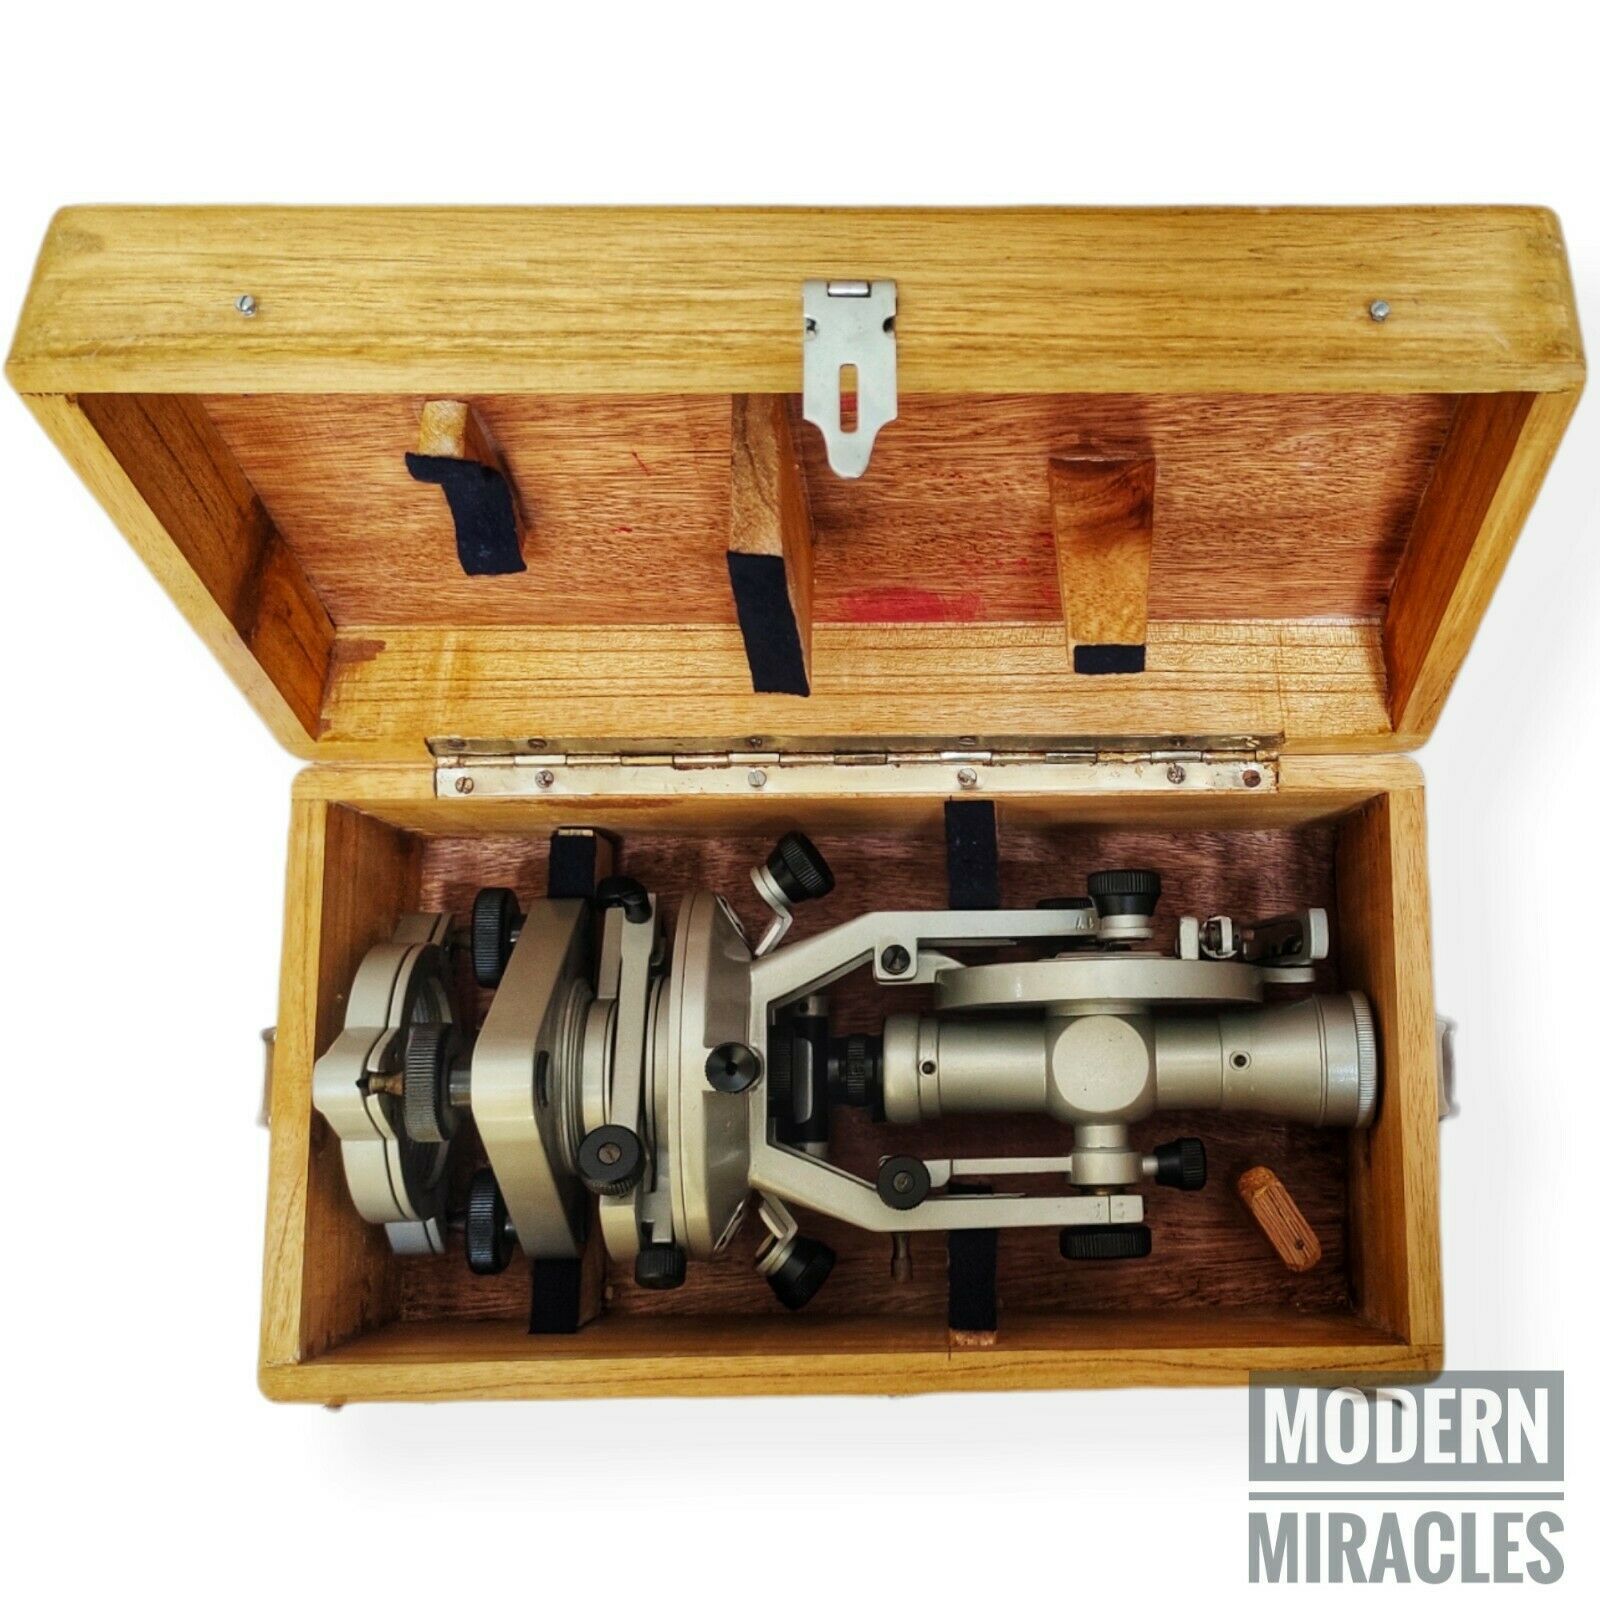 Details about    20 Seconds Brass Theodolite With Wood Box Transit Alidade Surveying Instrument 